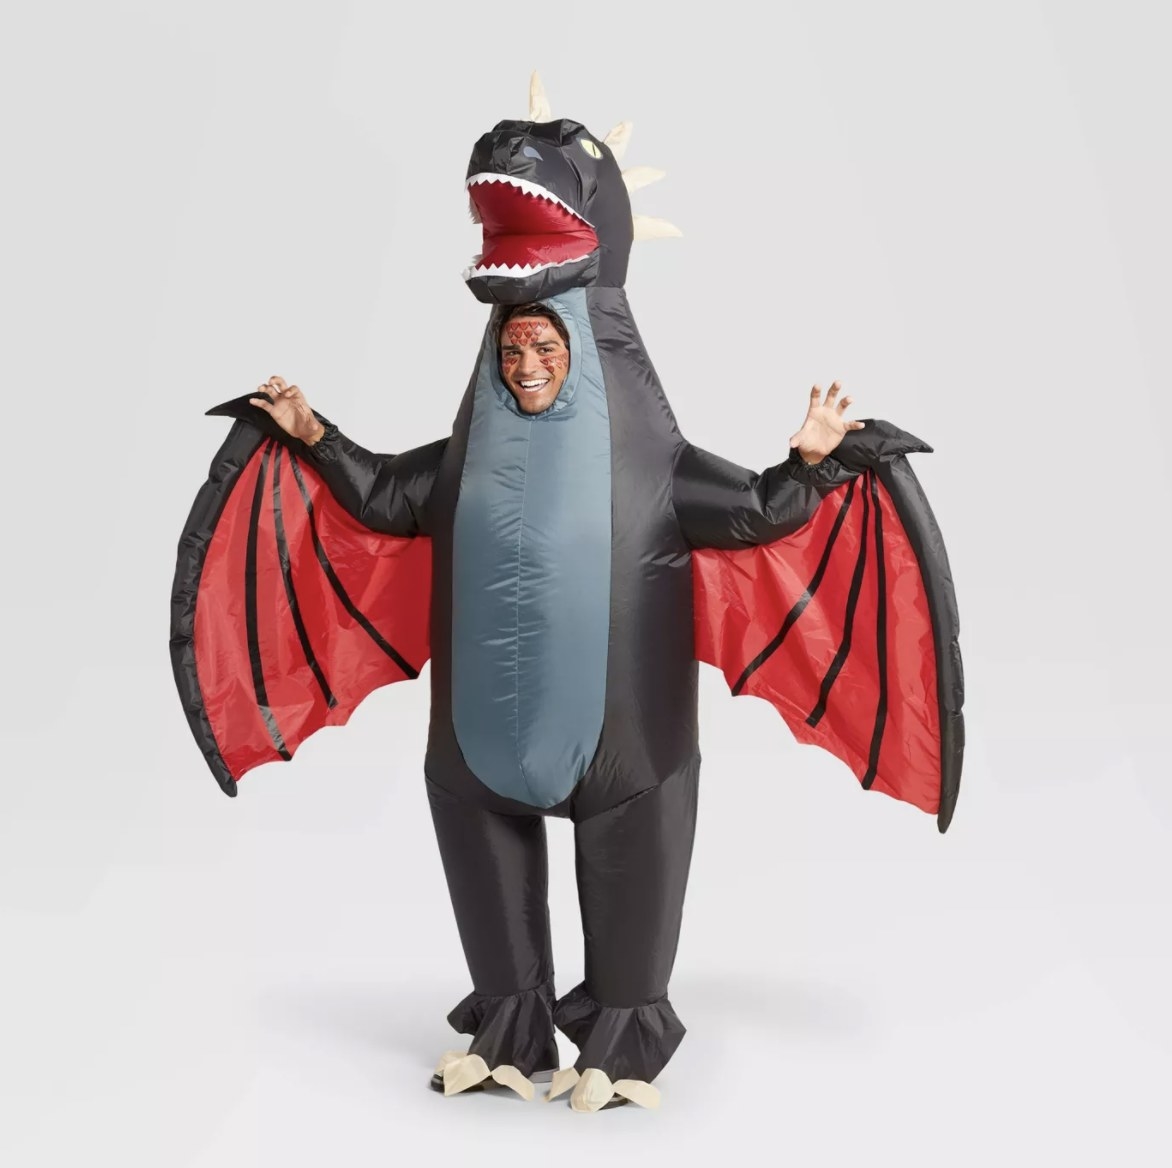 An adult wears a grey, black and red dragon costume that has wings, a head and legs complete with spikes and talons